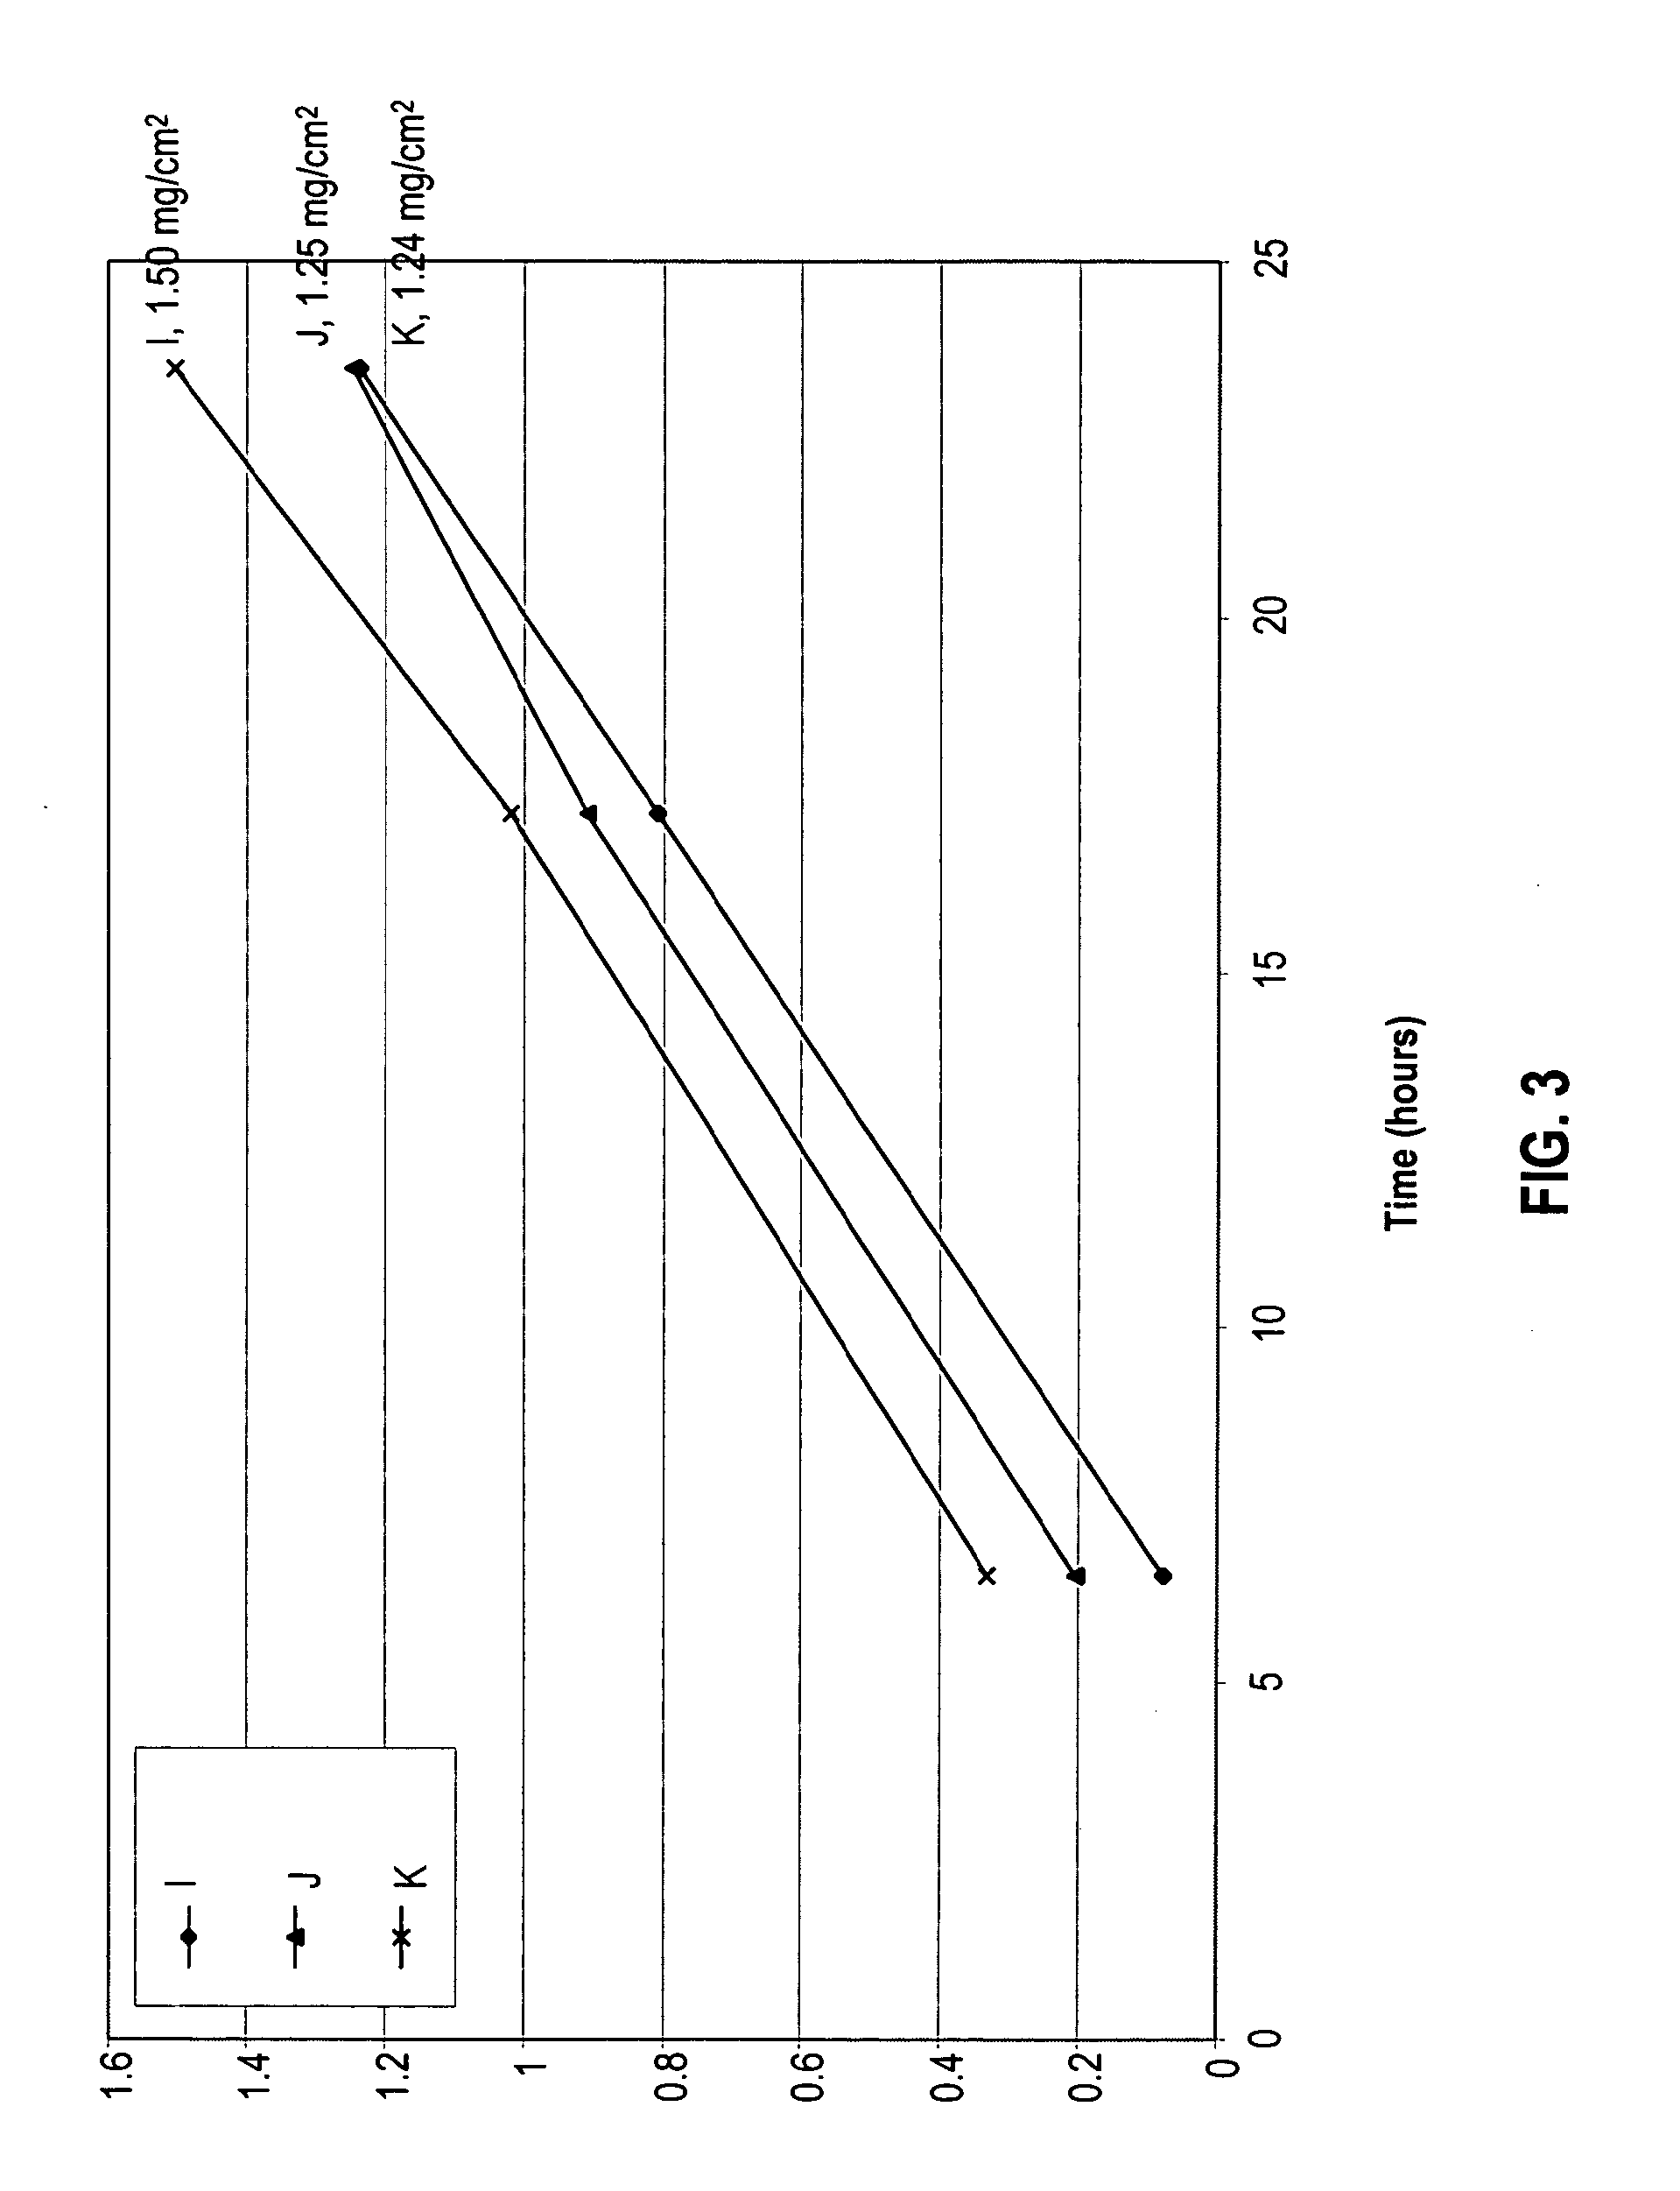 Transdermal administration of hydrophilic drugs using permeation enhancer composition